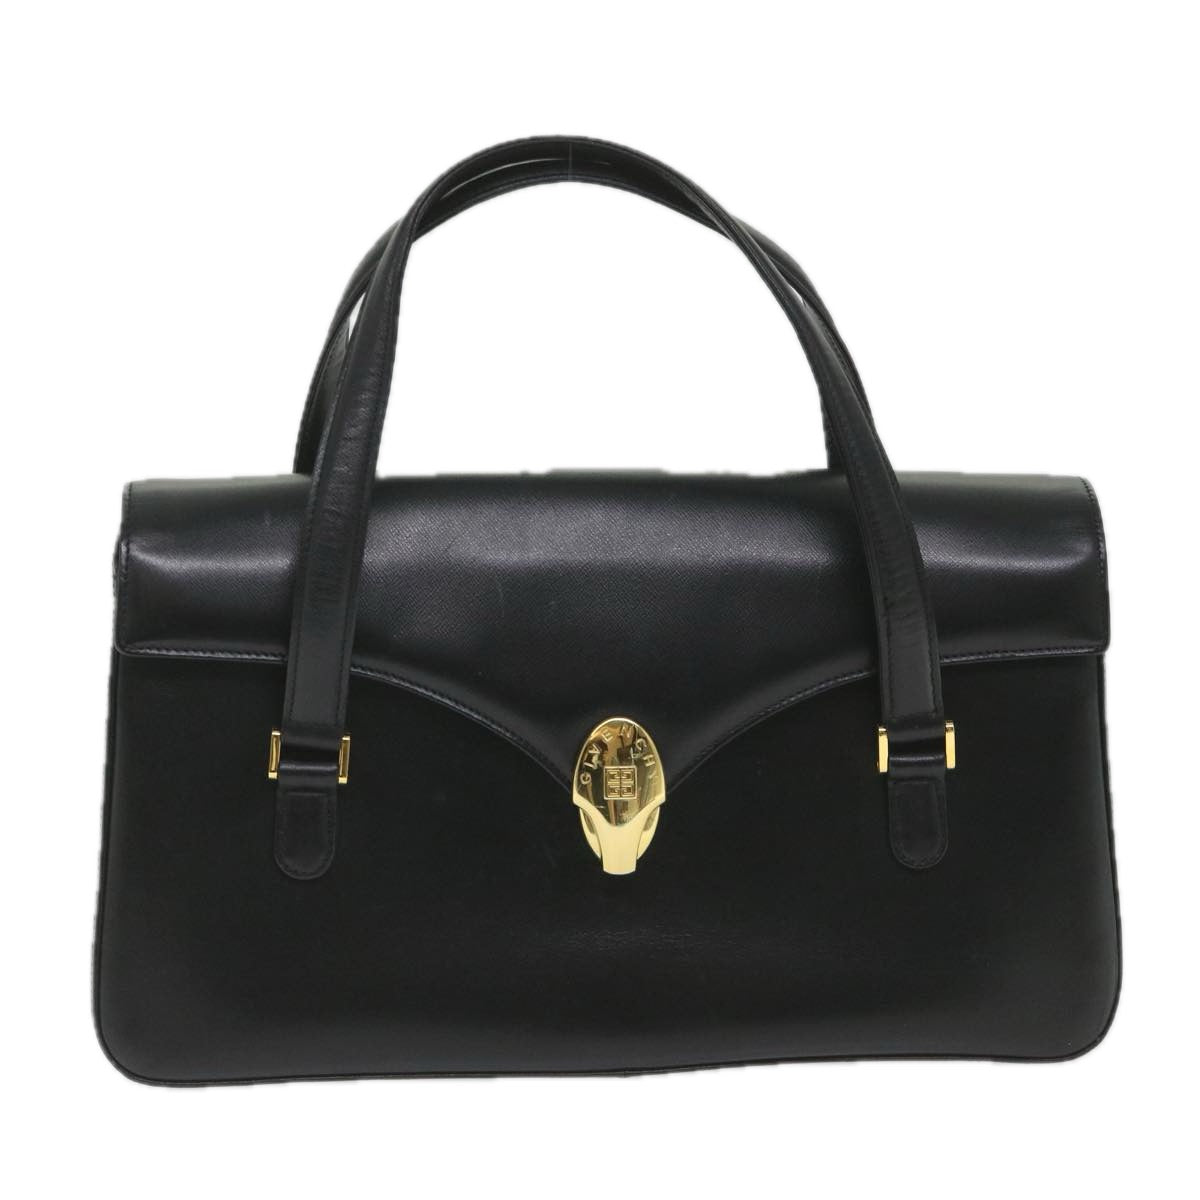 GIVENCHY Hand Bag Leather Black Auth bs9528 - 0